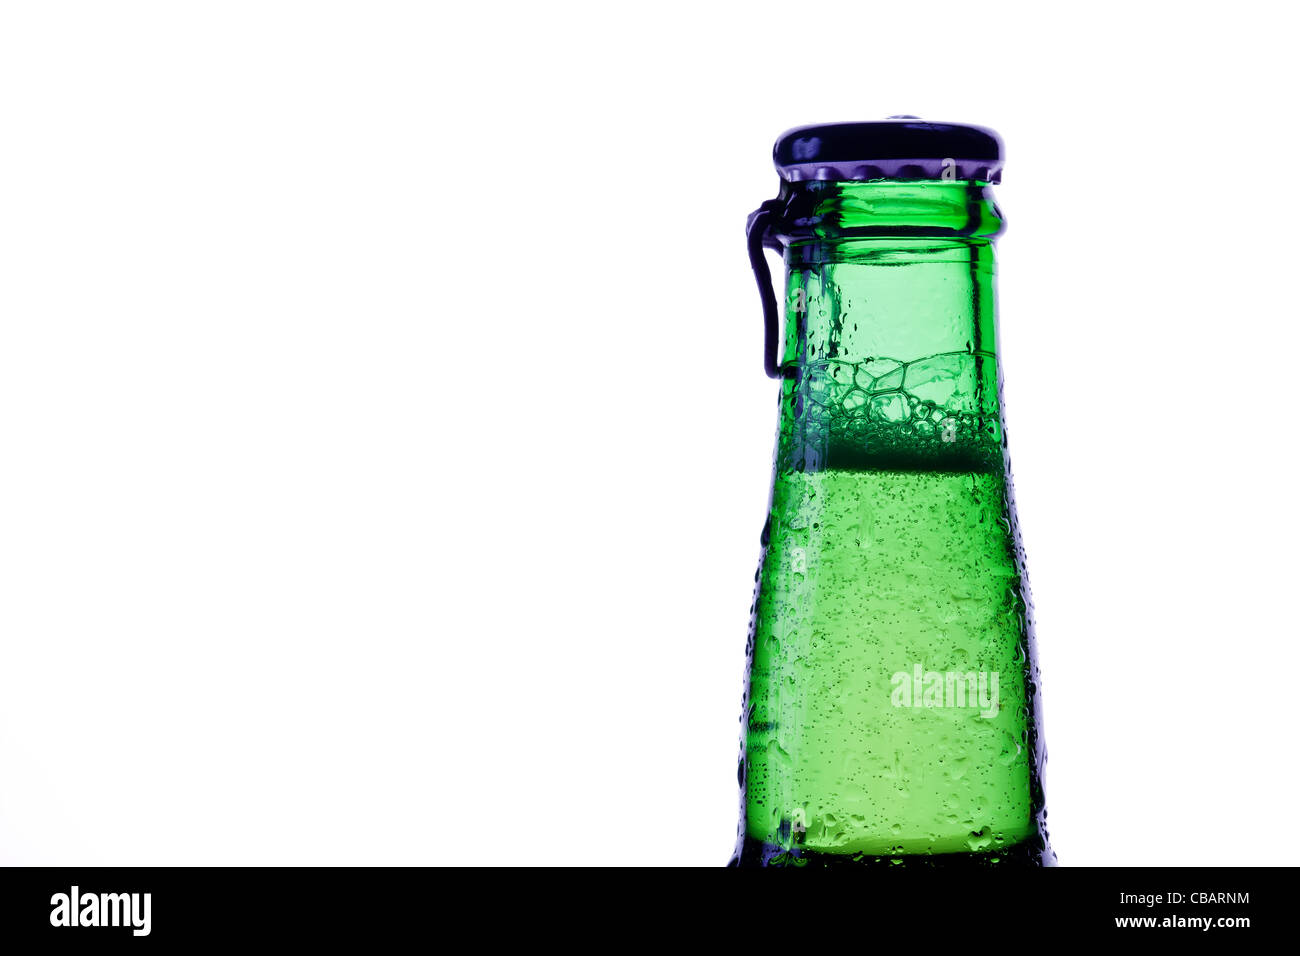 green beer bottle isolated over white background Stock Photo